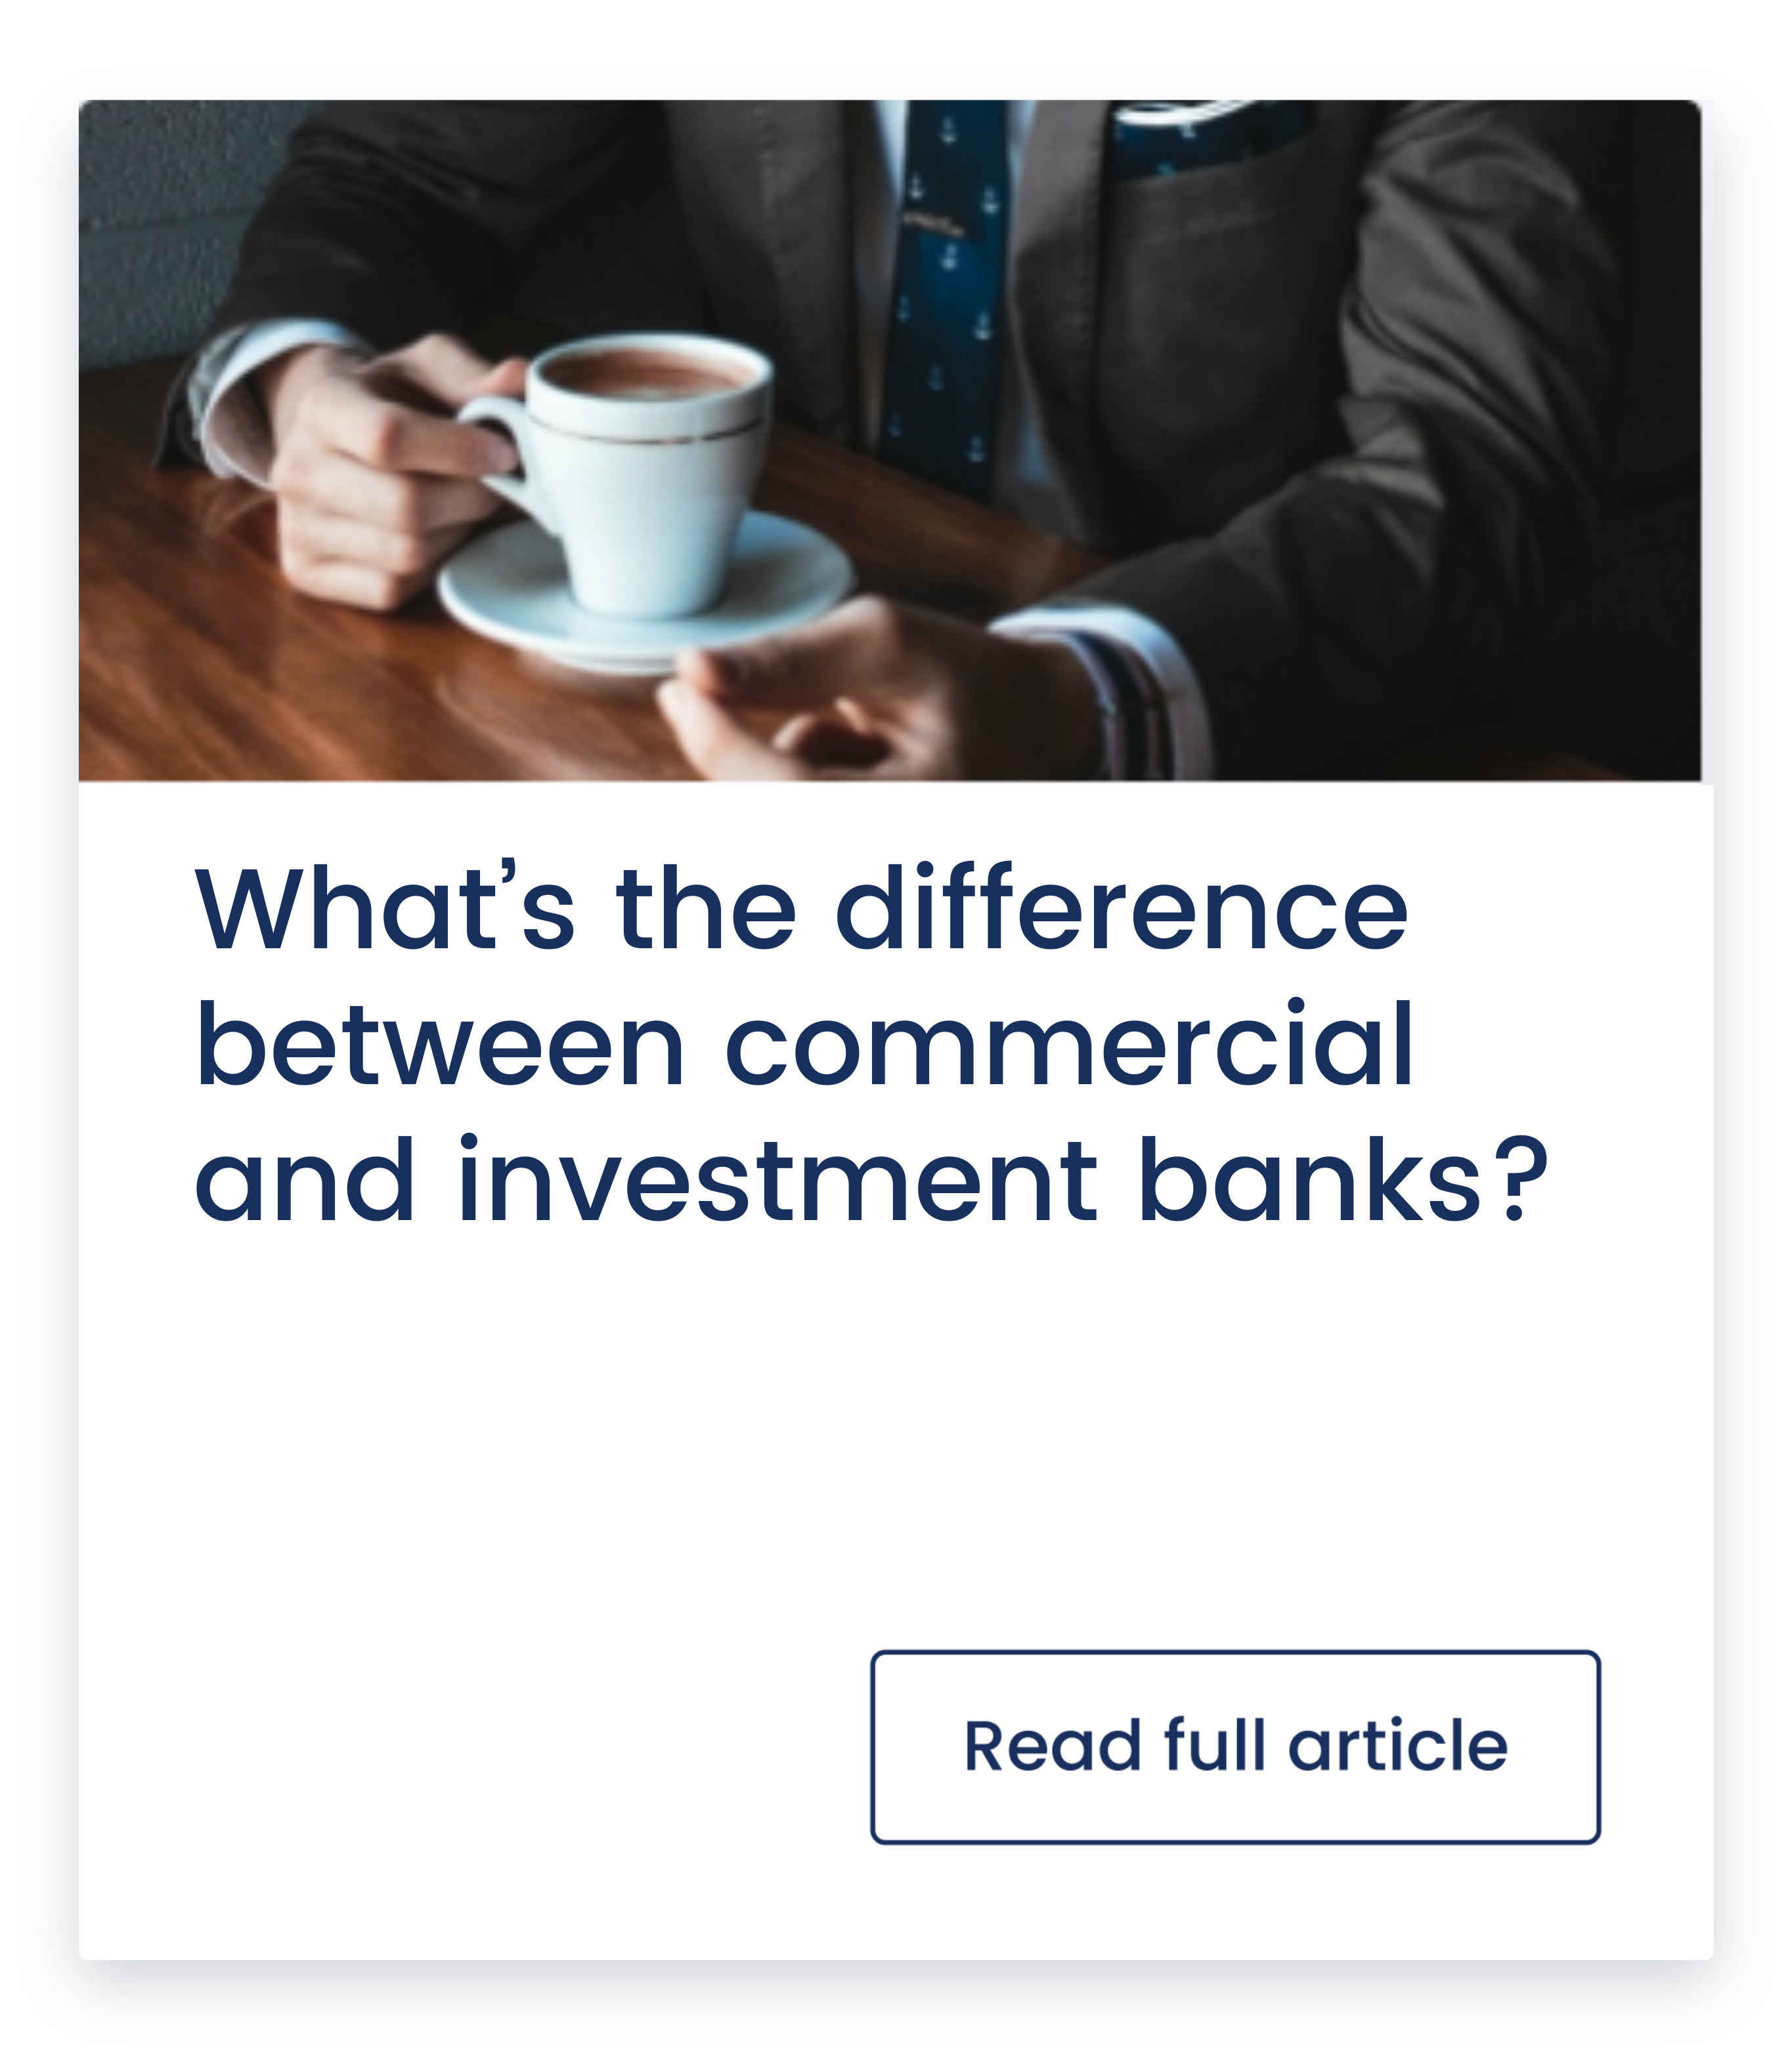 whats-the-difference-between-commercial-and-investment-banks